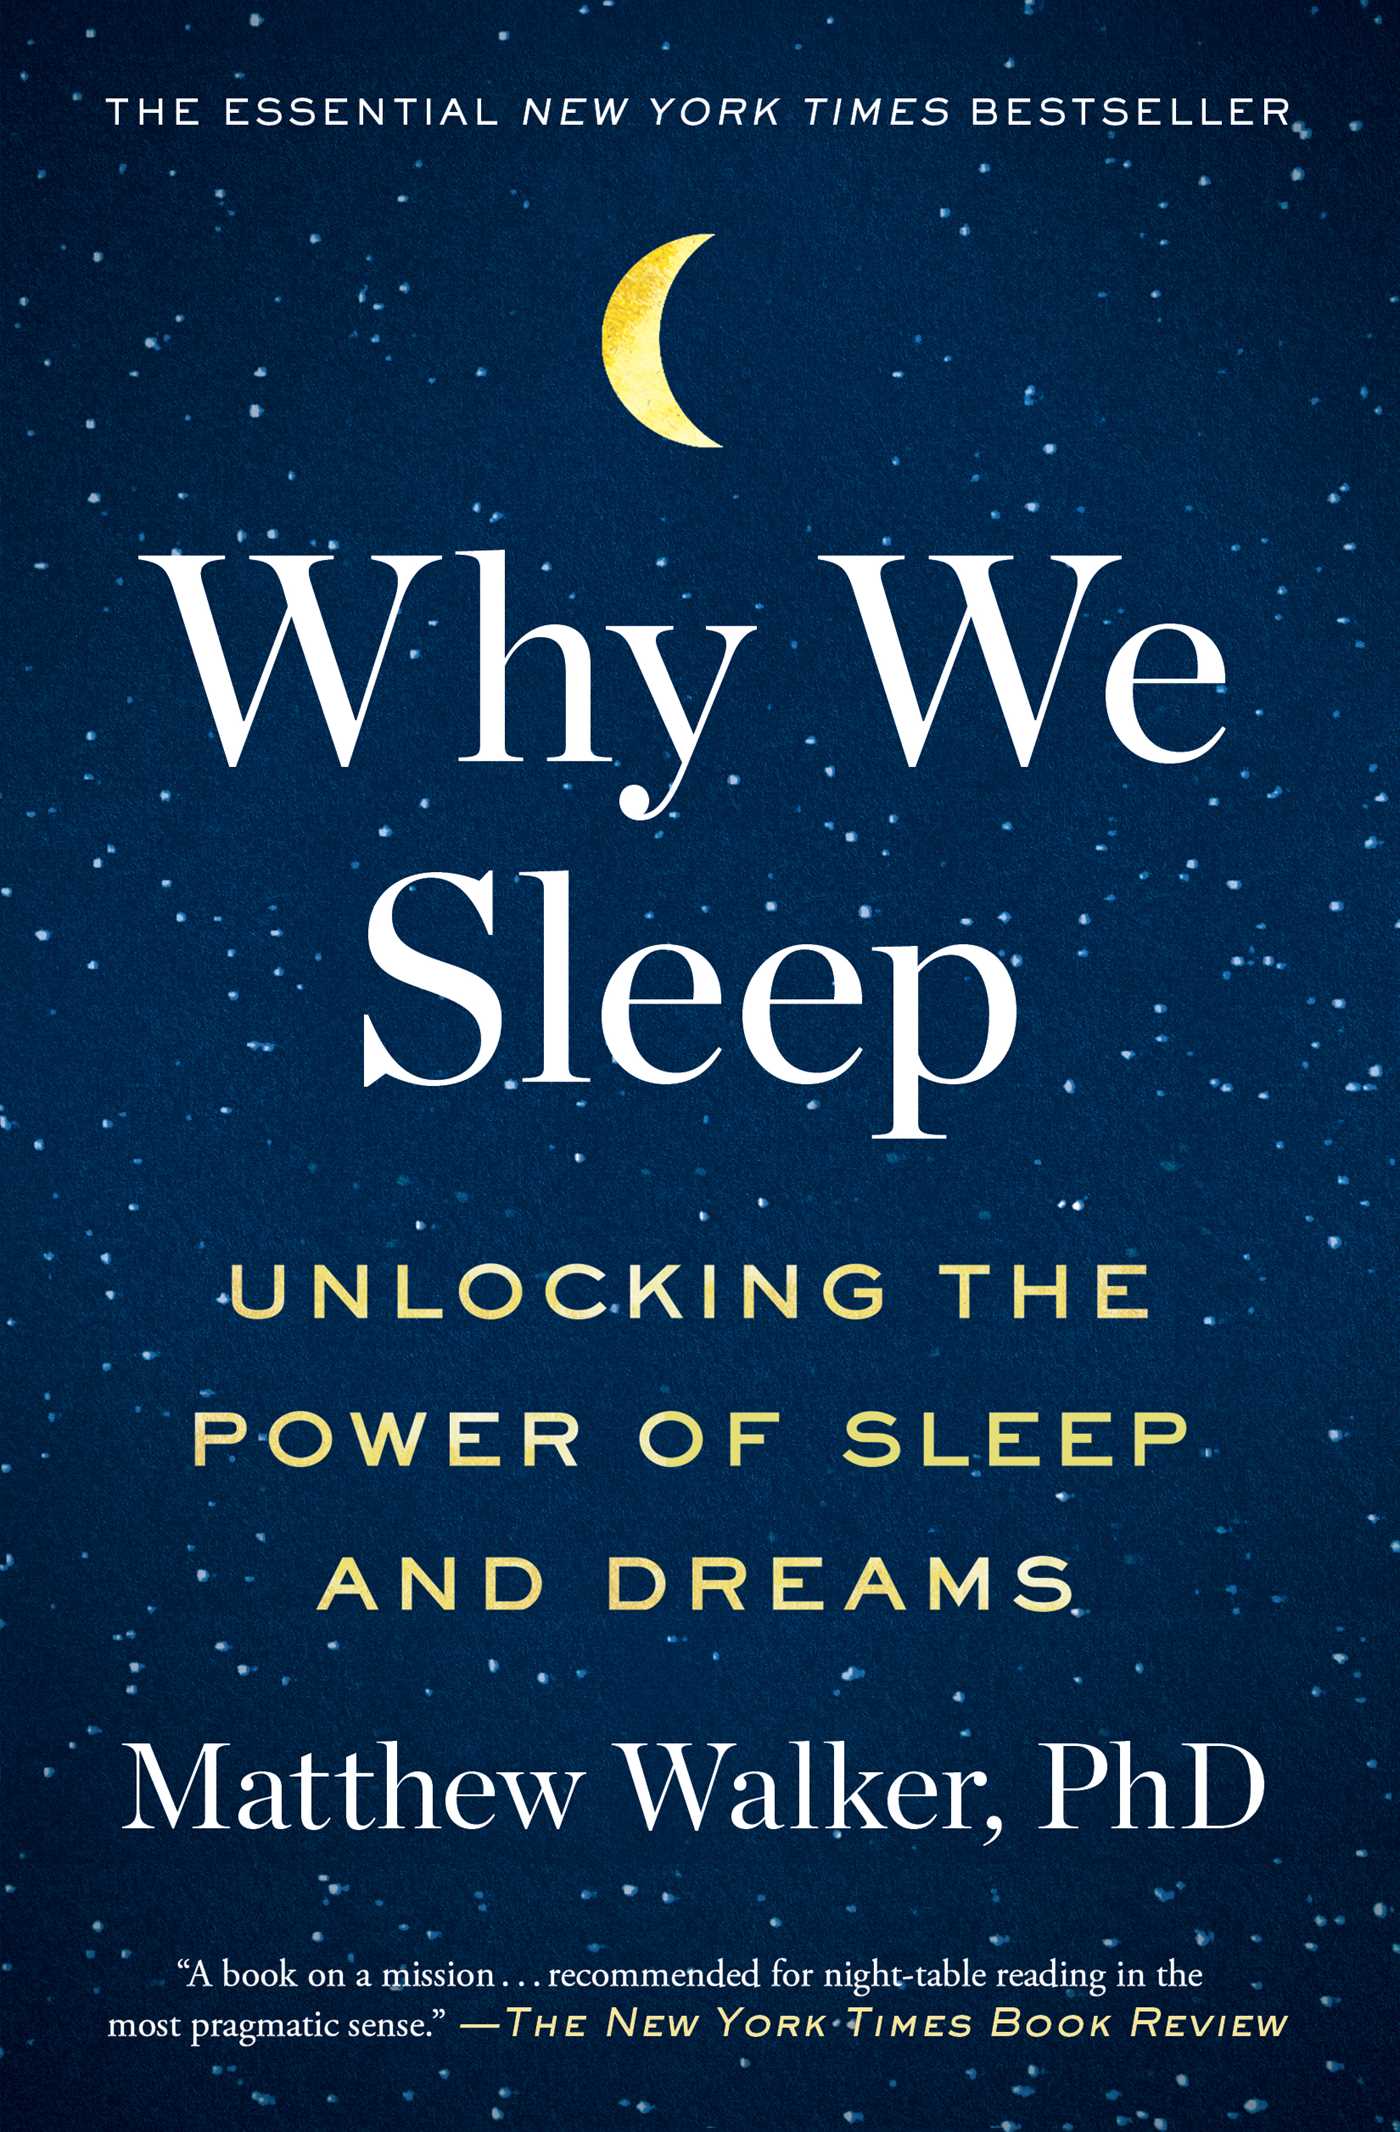 Why We Sleep Cover: Blue sky with stars and moon 